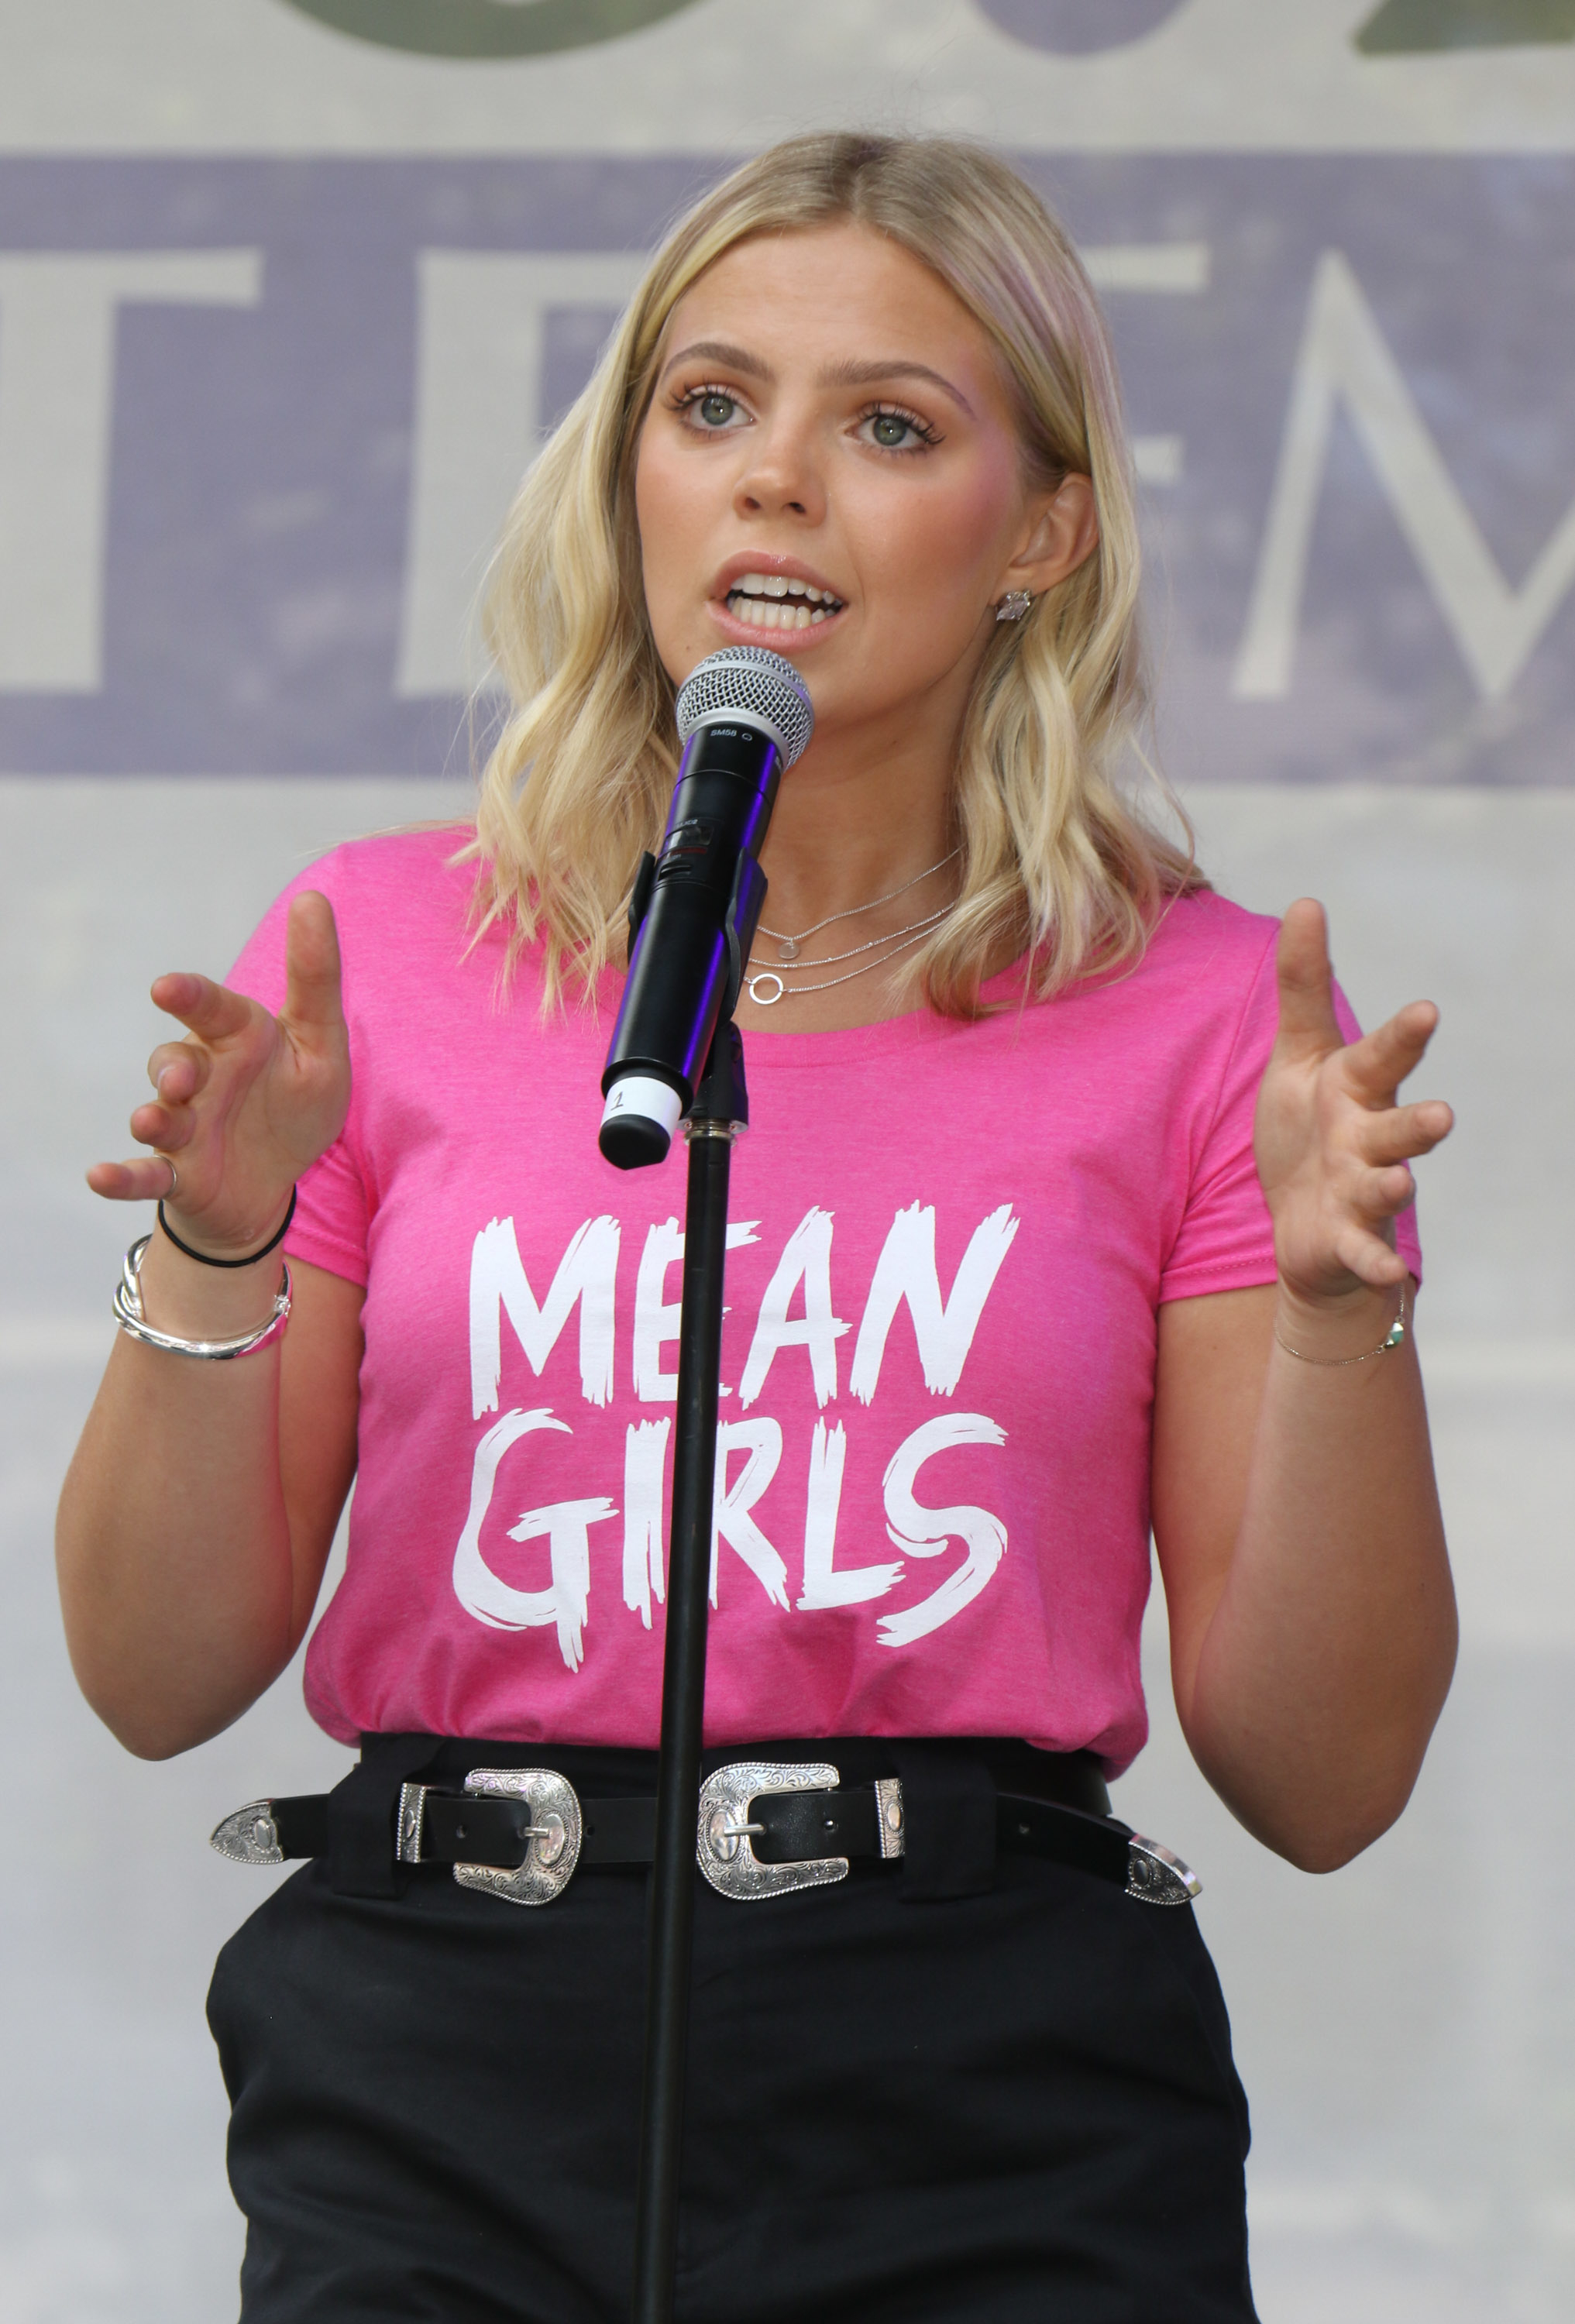 Closeup of Reneé Rapp talking into a mic wearing a shirt that says &quot;Mean Girls&quot;